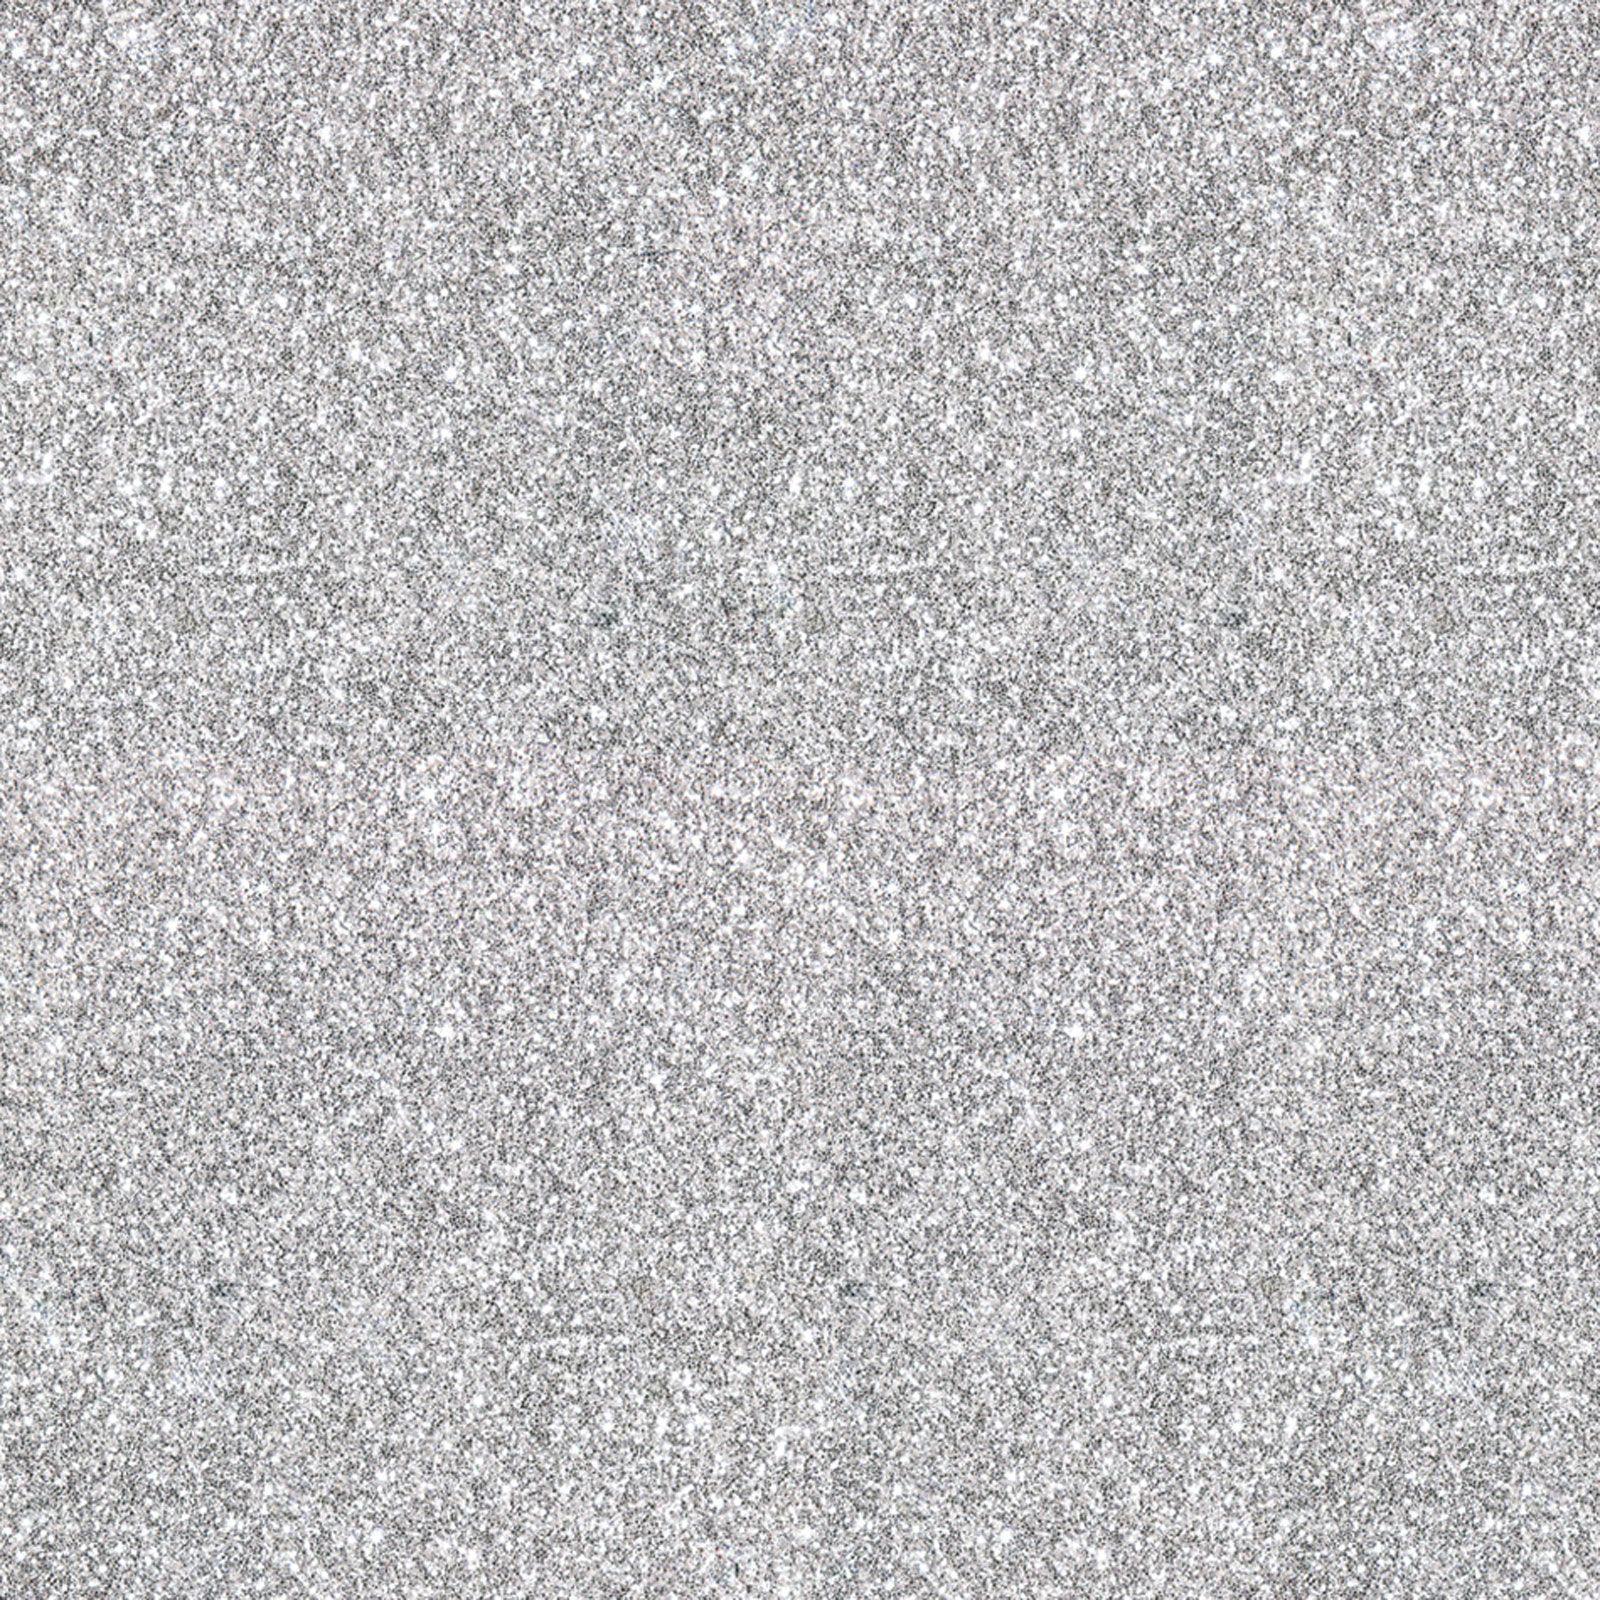 Silver Chunky Glitter Wallpaper Sparkly Glitter Fabric Wall PaperBling  Wallcovering 27in x 164ft One Roll  Amazonin Home Improvement